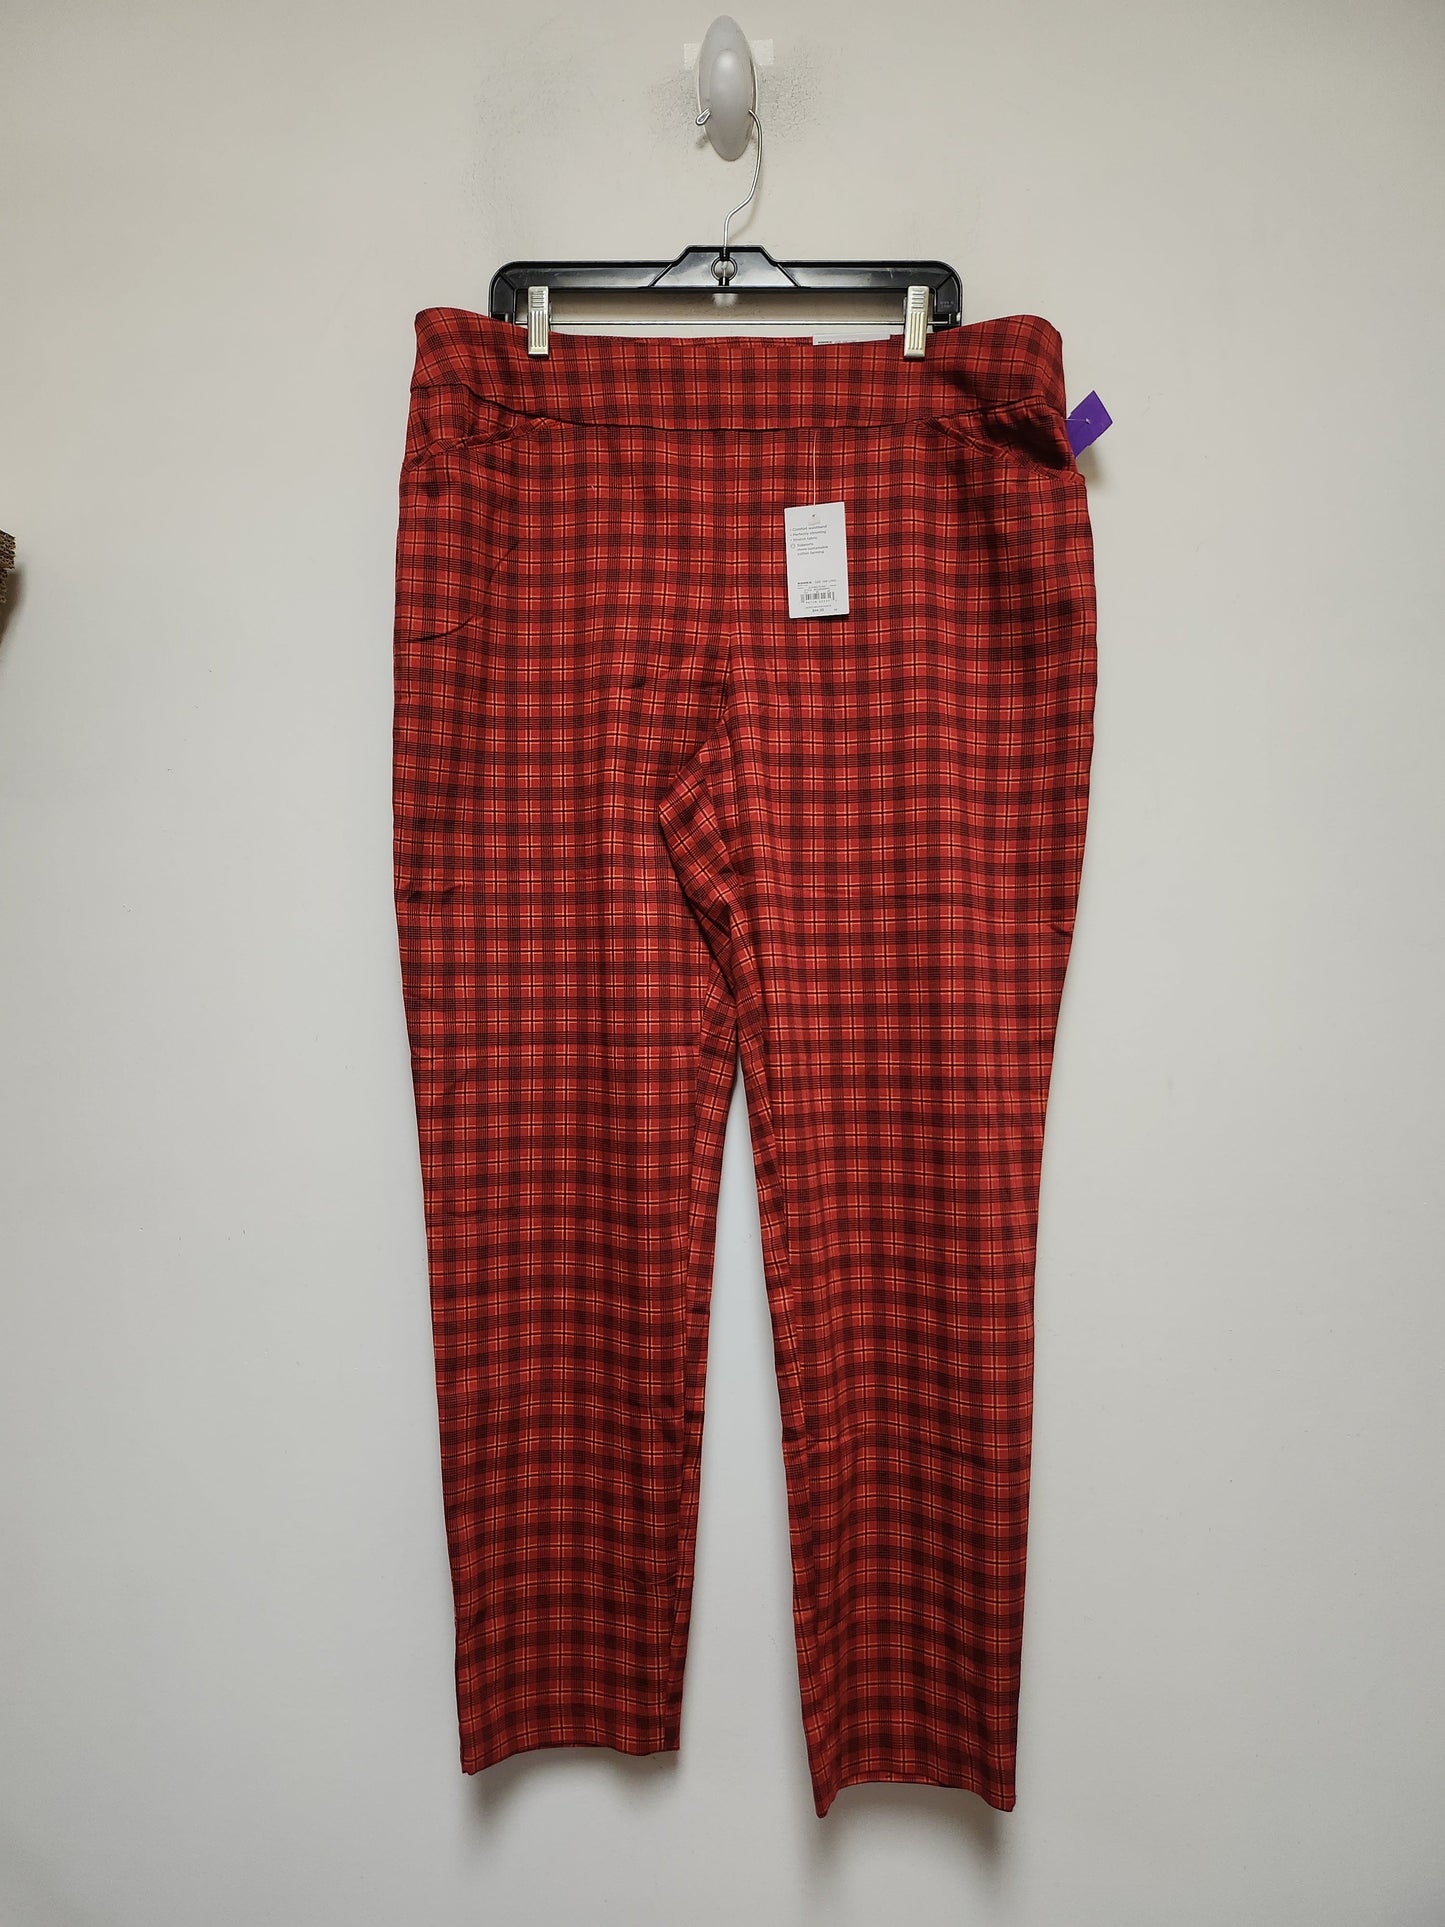 Plaid Pattern Pants Other Croft And Barrow, Size 16